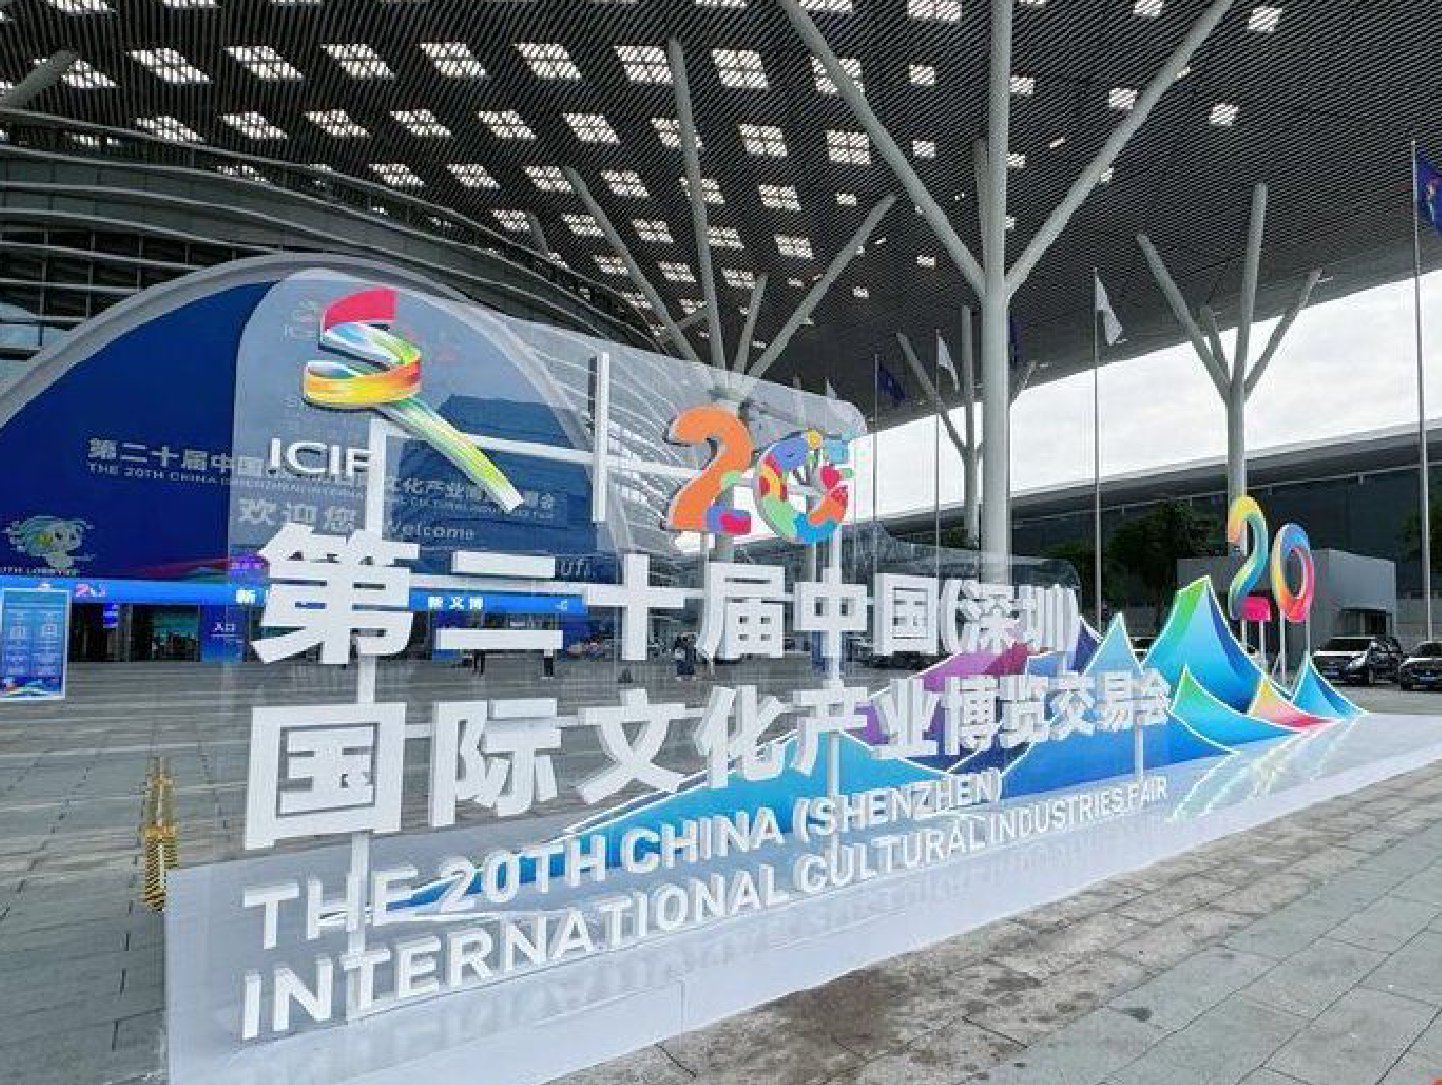  (Social) Guangdong Delegation Appears at the 20th ICIF